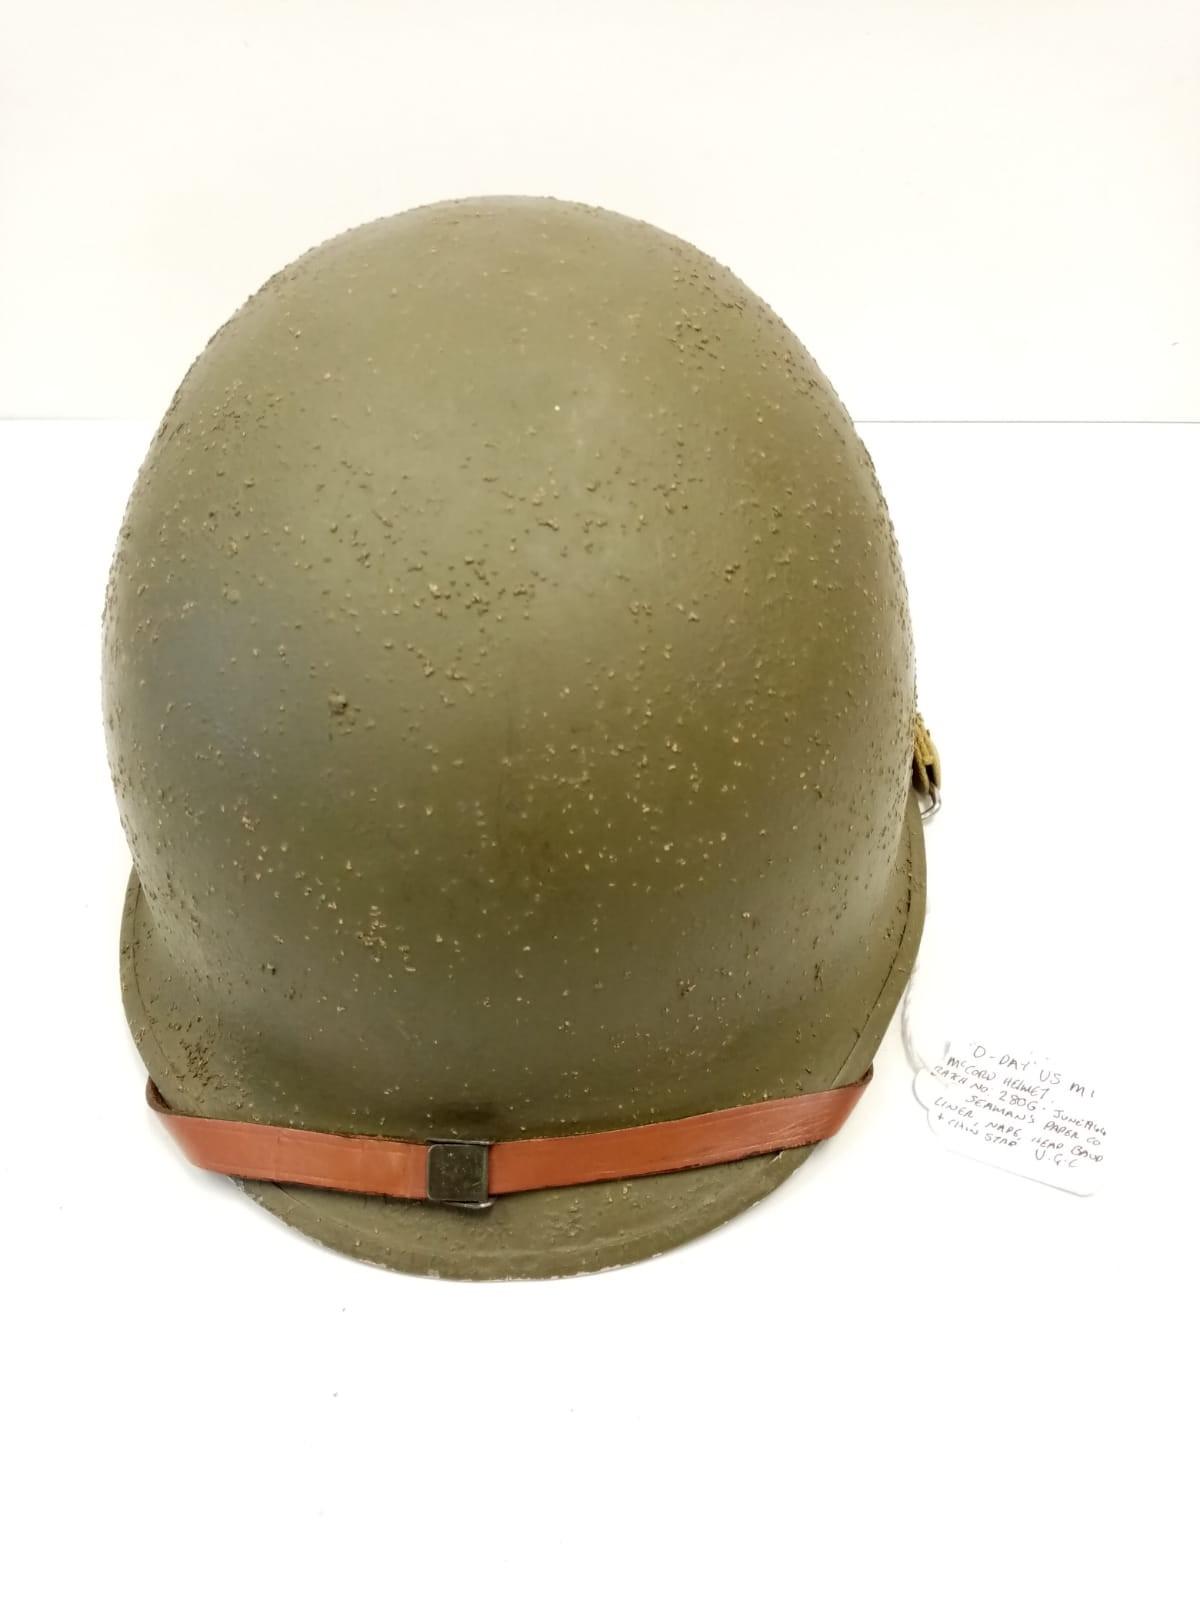 WW2 D-Day US McCord M1 Helmet. Batch No:280G which dates June 1944. Complete with a Seaman?s Paper